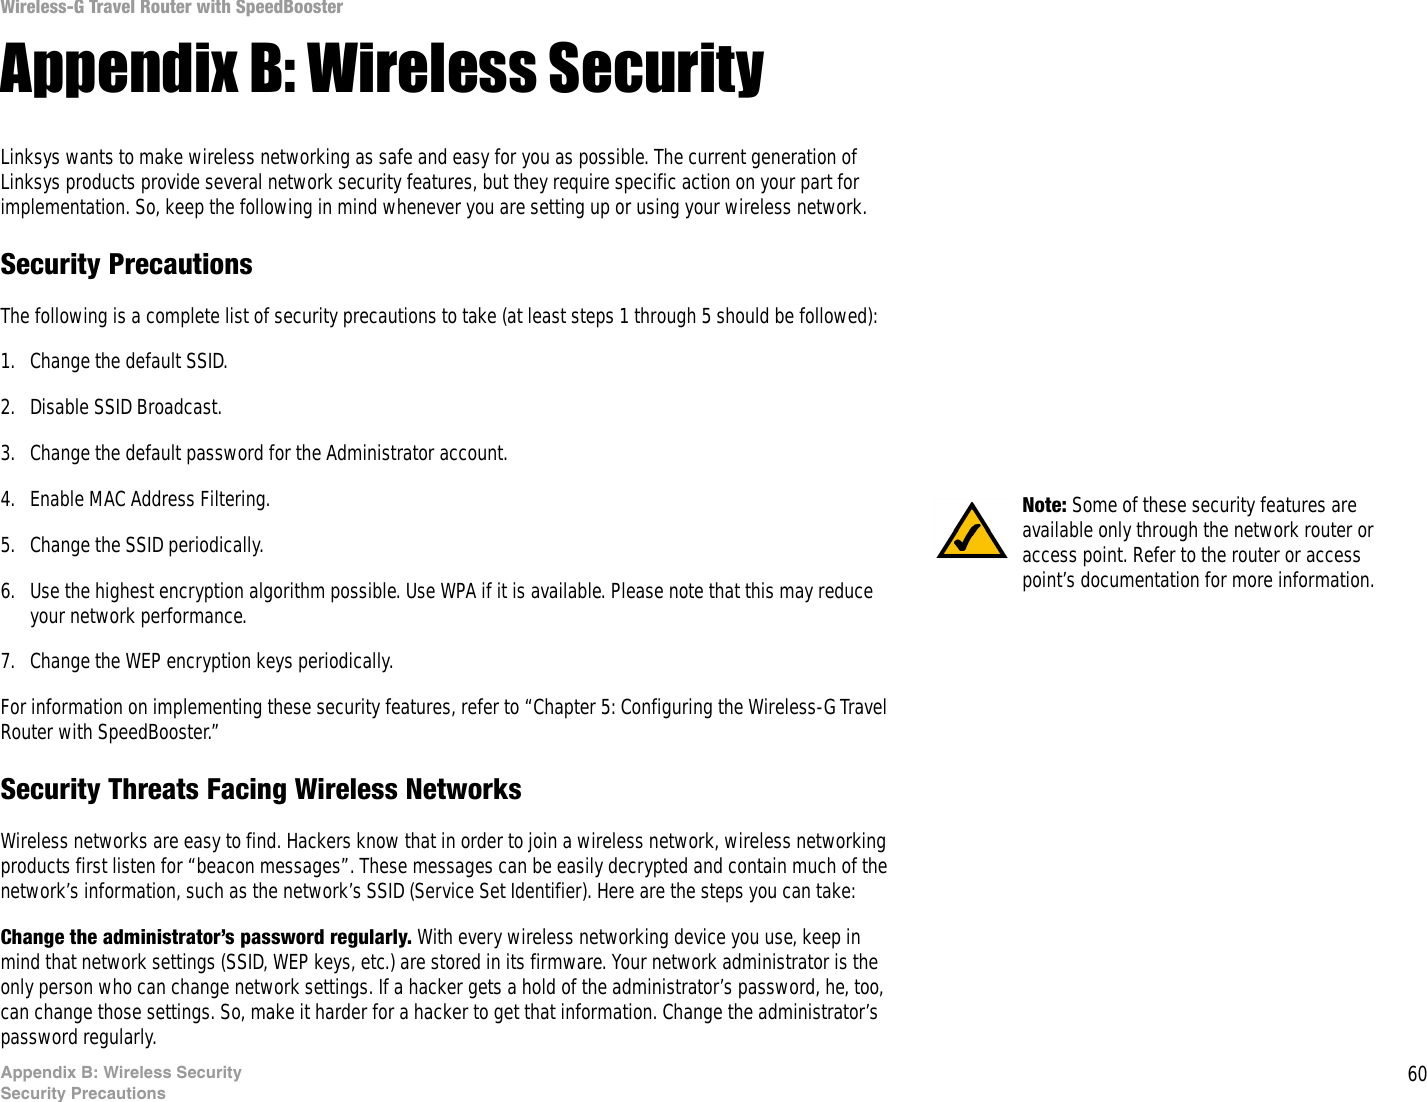 60Appendix B: Wireless SecuritySecurity PrecautionsWireless-G Travel Router with SpeedBoosterAppendix B: Wireless SecurityLinksys wants to make wireless networking as safe and easy for you as possible. The current generation of Linksys products provide several network security features, but they require specific action on your part for implementation. So, keep the following in mind whenever you are setting up or using your wireless network.Security PrecautionsThe following is a complete list of security precautions to take (at least steps 1 through 5 should be followed):1. Change the default SSID. 2. Disable SSID Broadcast. 3. Change the default password for the Administrator account. 4. Enable MAC Address Filtering. 5. Change the SSID periodically. 6. Use the highest encryption algorithm possible. Use WPA if it is available. Please note that this may reduce your network performance. 7. Change the WEP encryption keys periodically. For information on implementing these security features, refer to “Chapter 5: Configuring the Wireless-G Travel Router with SpeedBooster.”Security Threats Facing Wireless Networks Wireless networks are easy to find. Hackers know that in order to join a wireless network, wireless networking products first listen for “beacon messages”. These messages can be easily decrypted and contain much of the network’s information, such as the network’s SSID (Service Set Identifier). Here are the steps you can take:Change the administrator’s password regularly. With every wireless networking device you use, keep in mind that network settings (SSID, WEP keys, etc.) are stored in its firmware. Your network administrator is the only person who can change network settings. If a hacker gets a hold of the administrator’s password, he, too, can change those settings. So, make it harder for a hacker to get that information. Change the administrator’s password regularly.Note: Some of these security features are available only through the network router or access point. Refer to the router or access point’s documentation for more information.